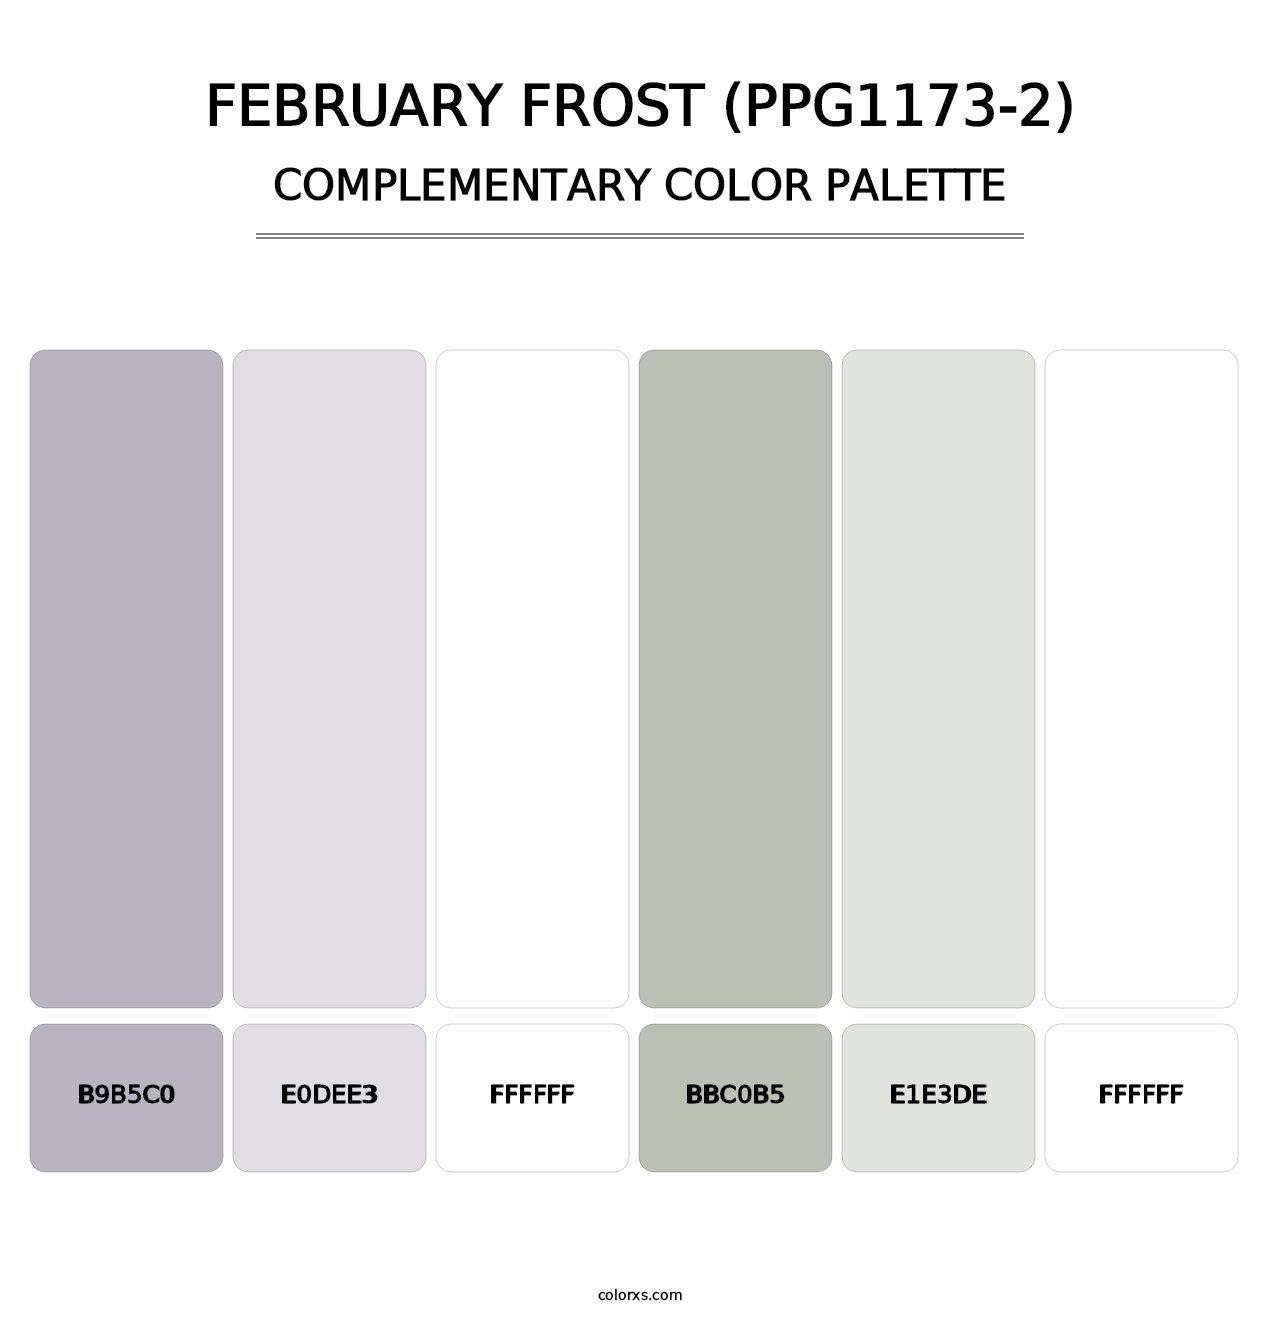 February Frost (PPG1173-2) - Complementary Color Palette